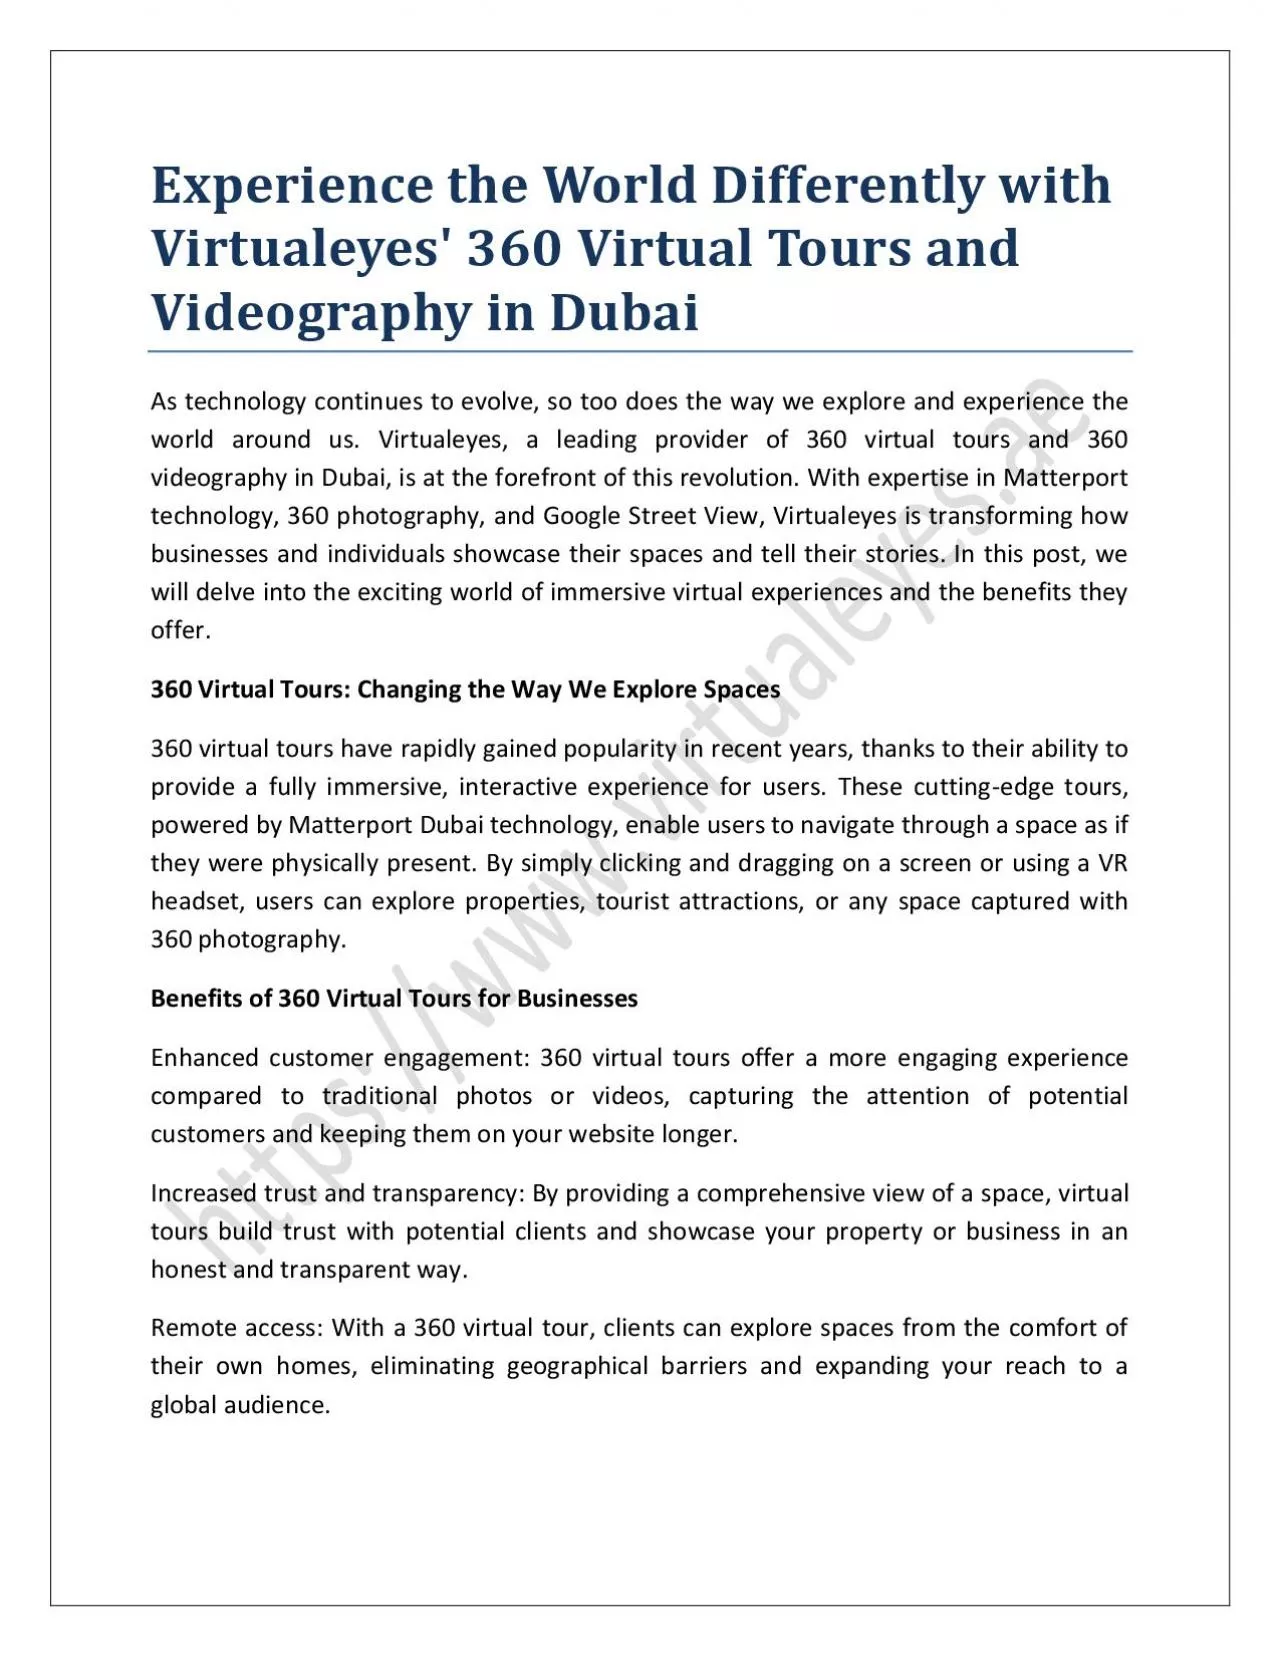 Experience the World Differently with Virtualeyes’ 360 Virtual Tours and Videography